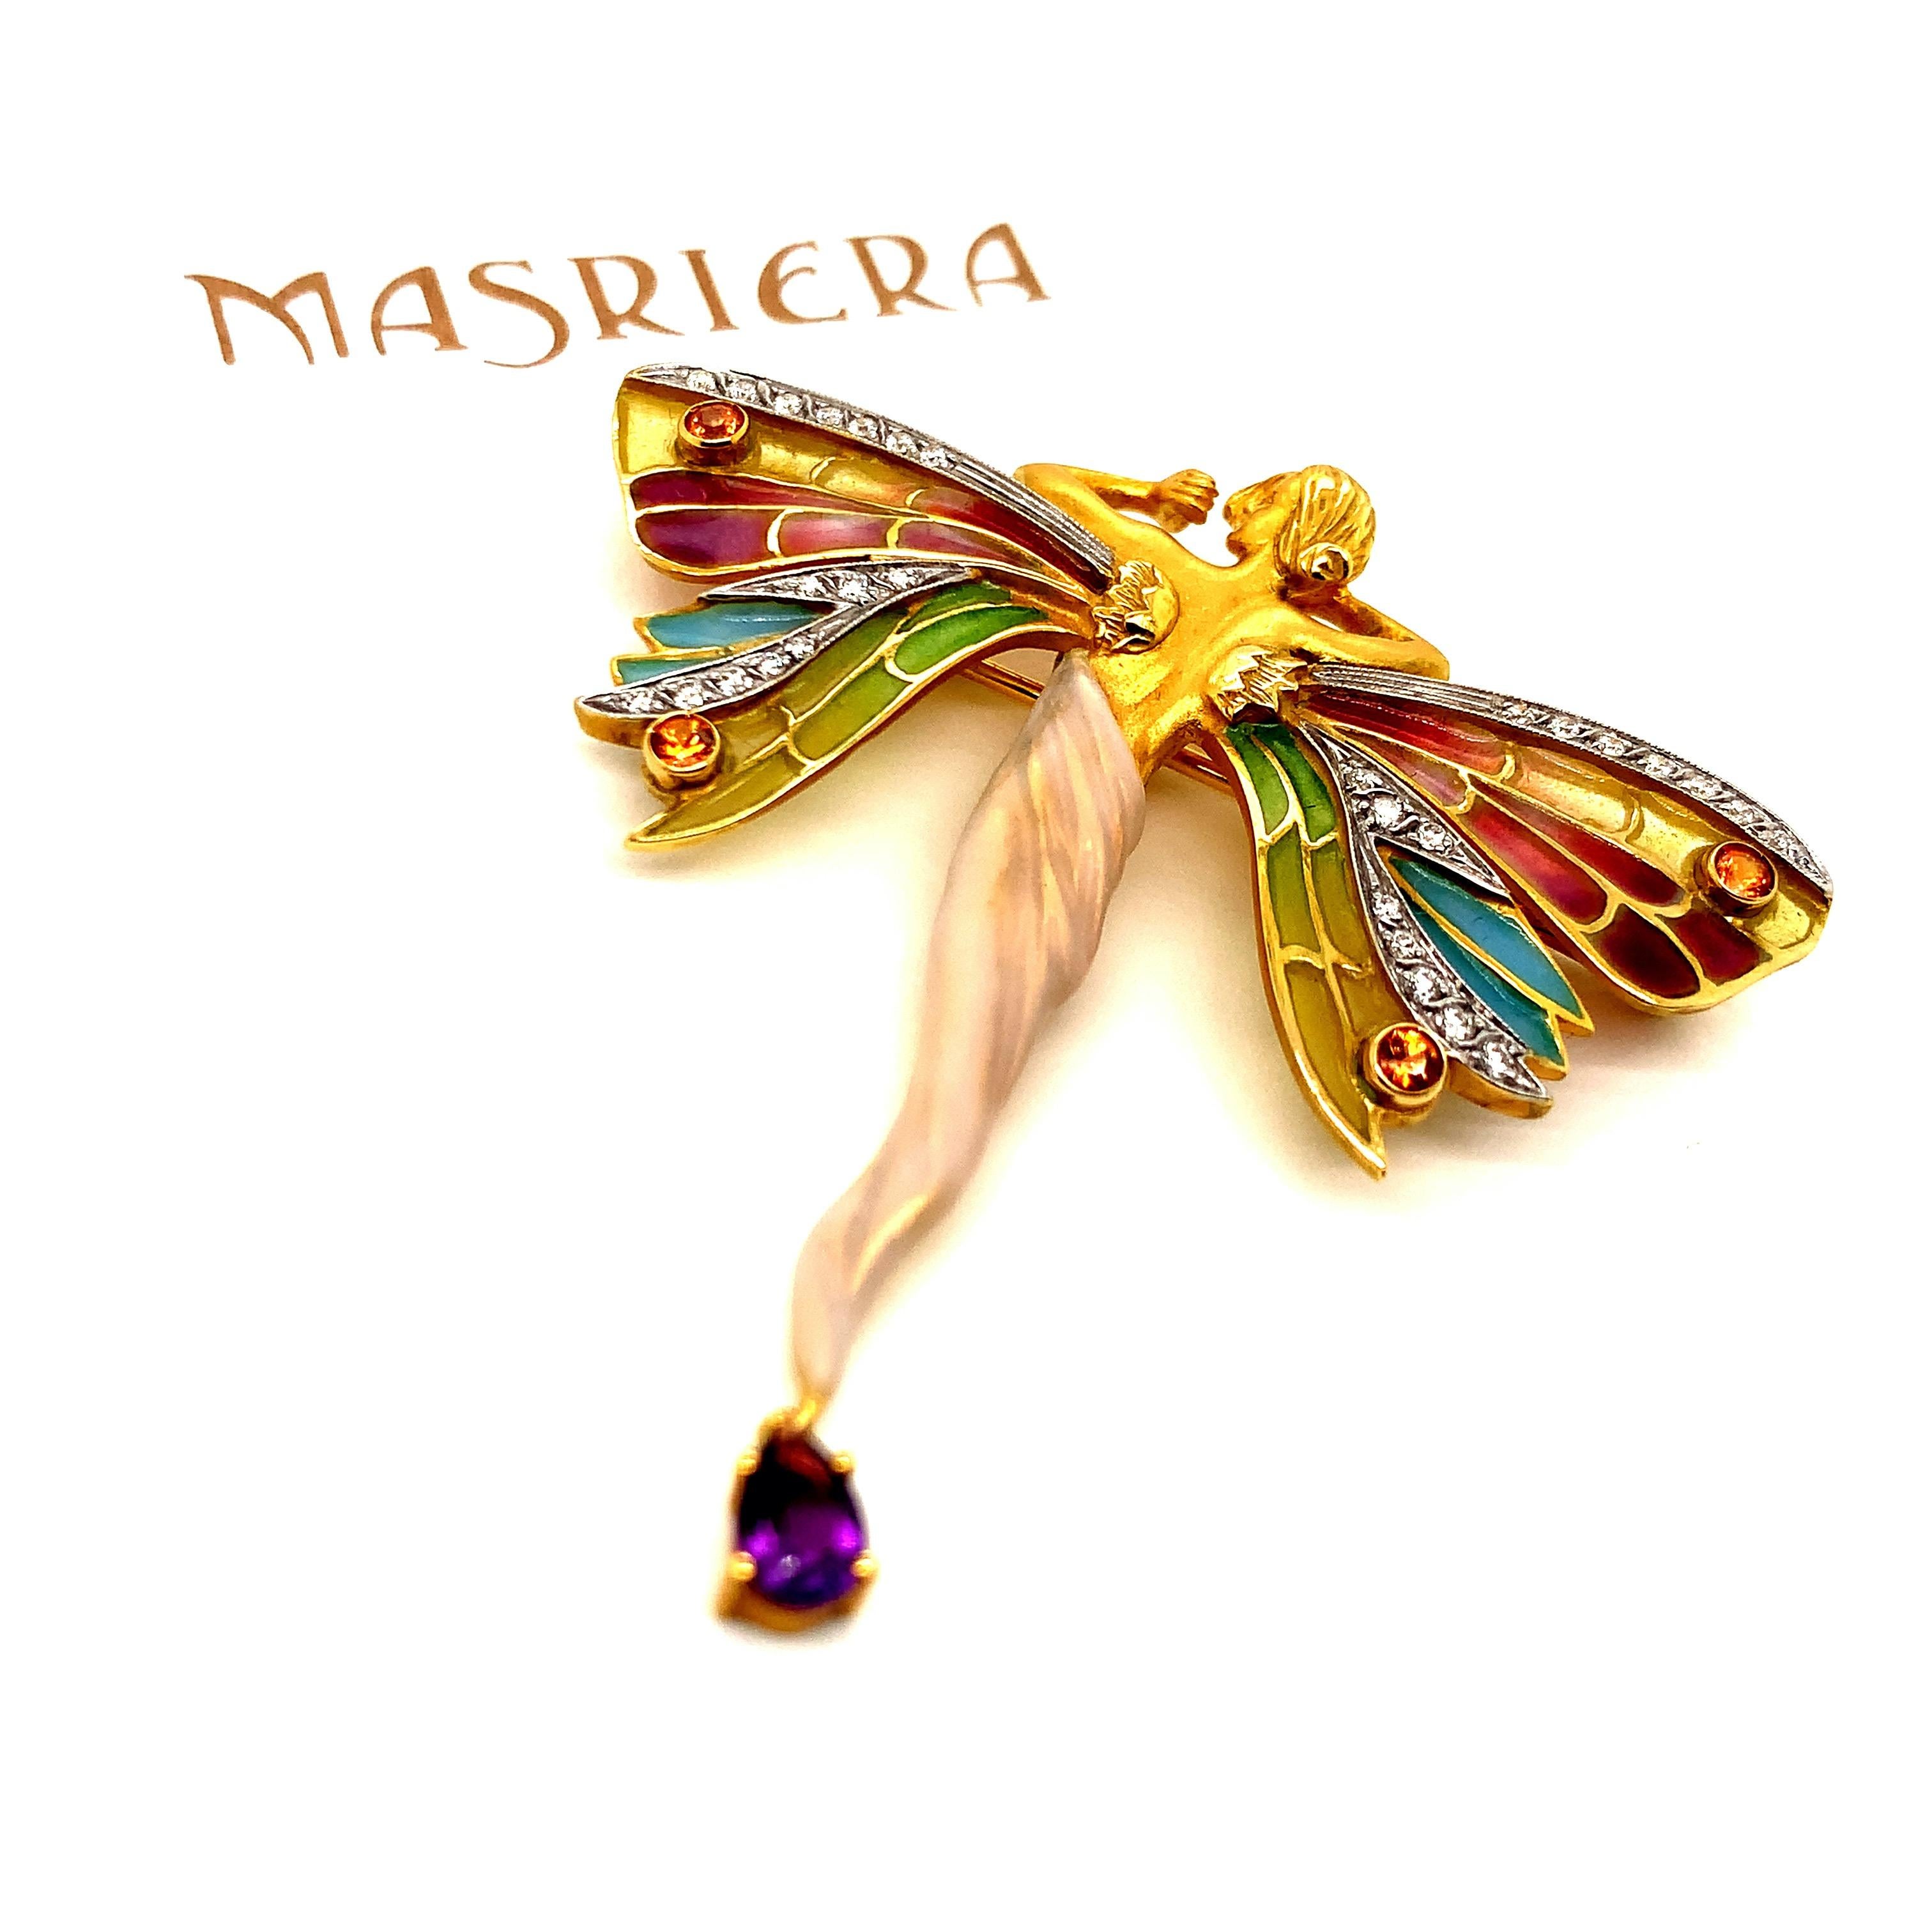 Masriera Nymph Butterfly Brooch In Excellent Condition For Sale In New York, NY